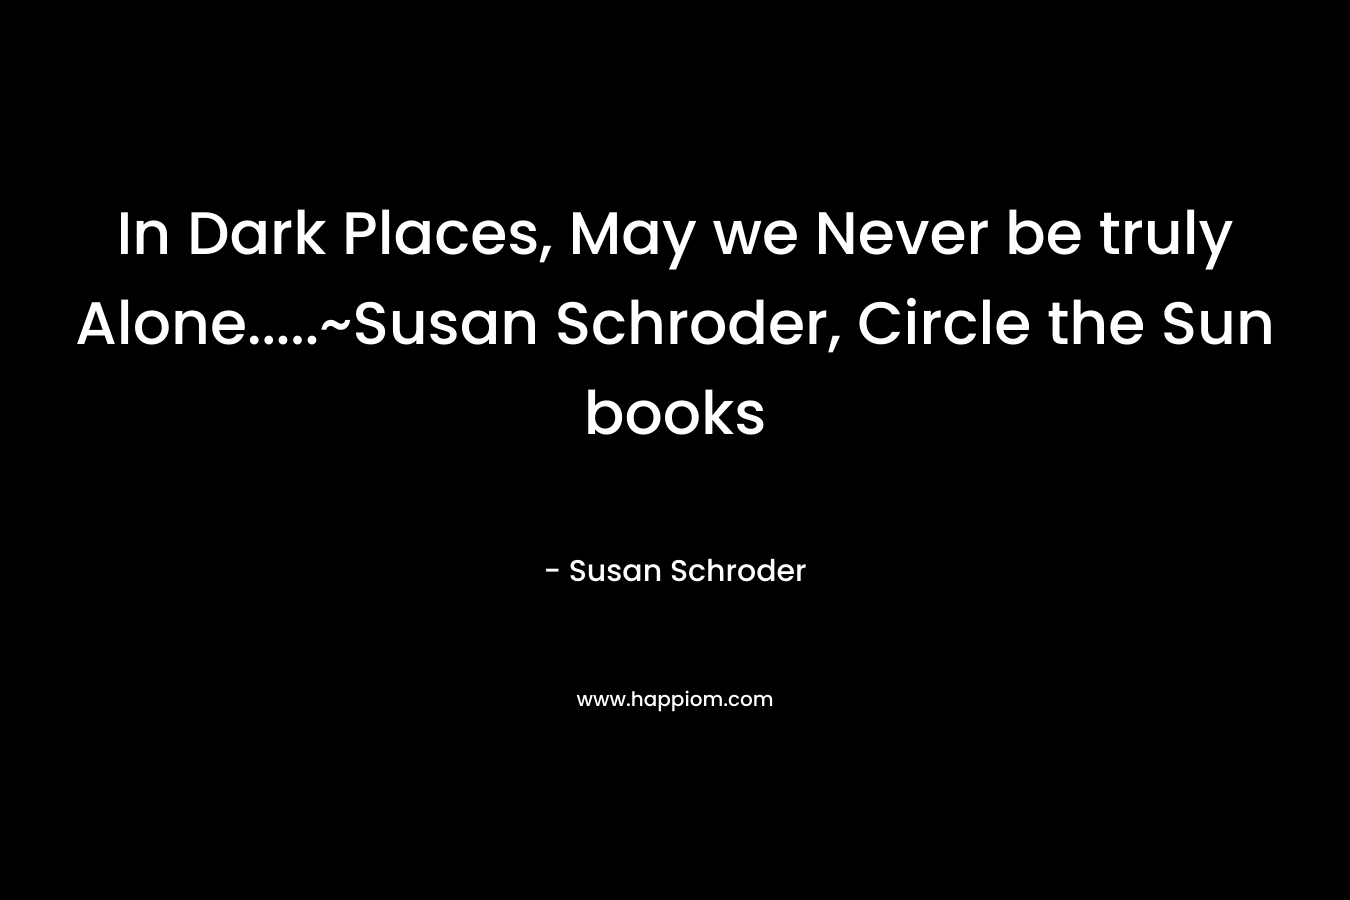 In Dark Places, May we Never be truly Alone.....~Susan Schroder, Circle the Sun books